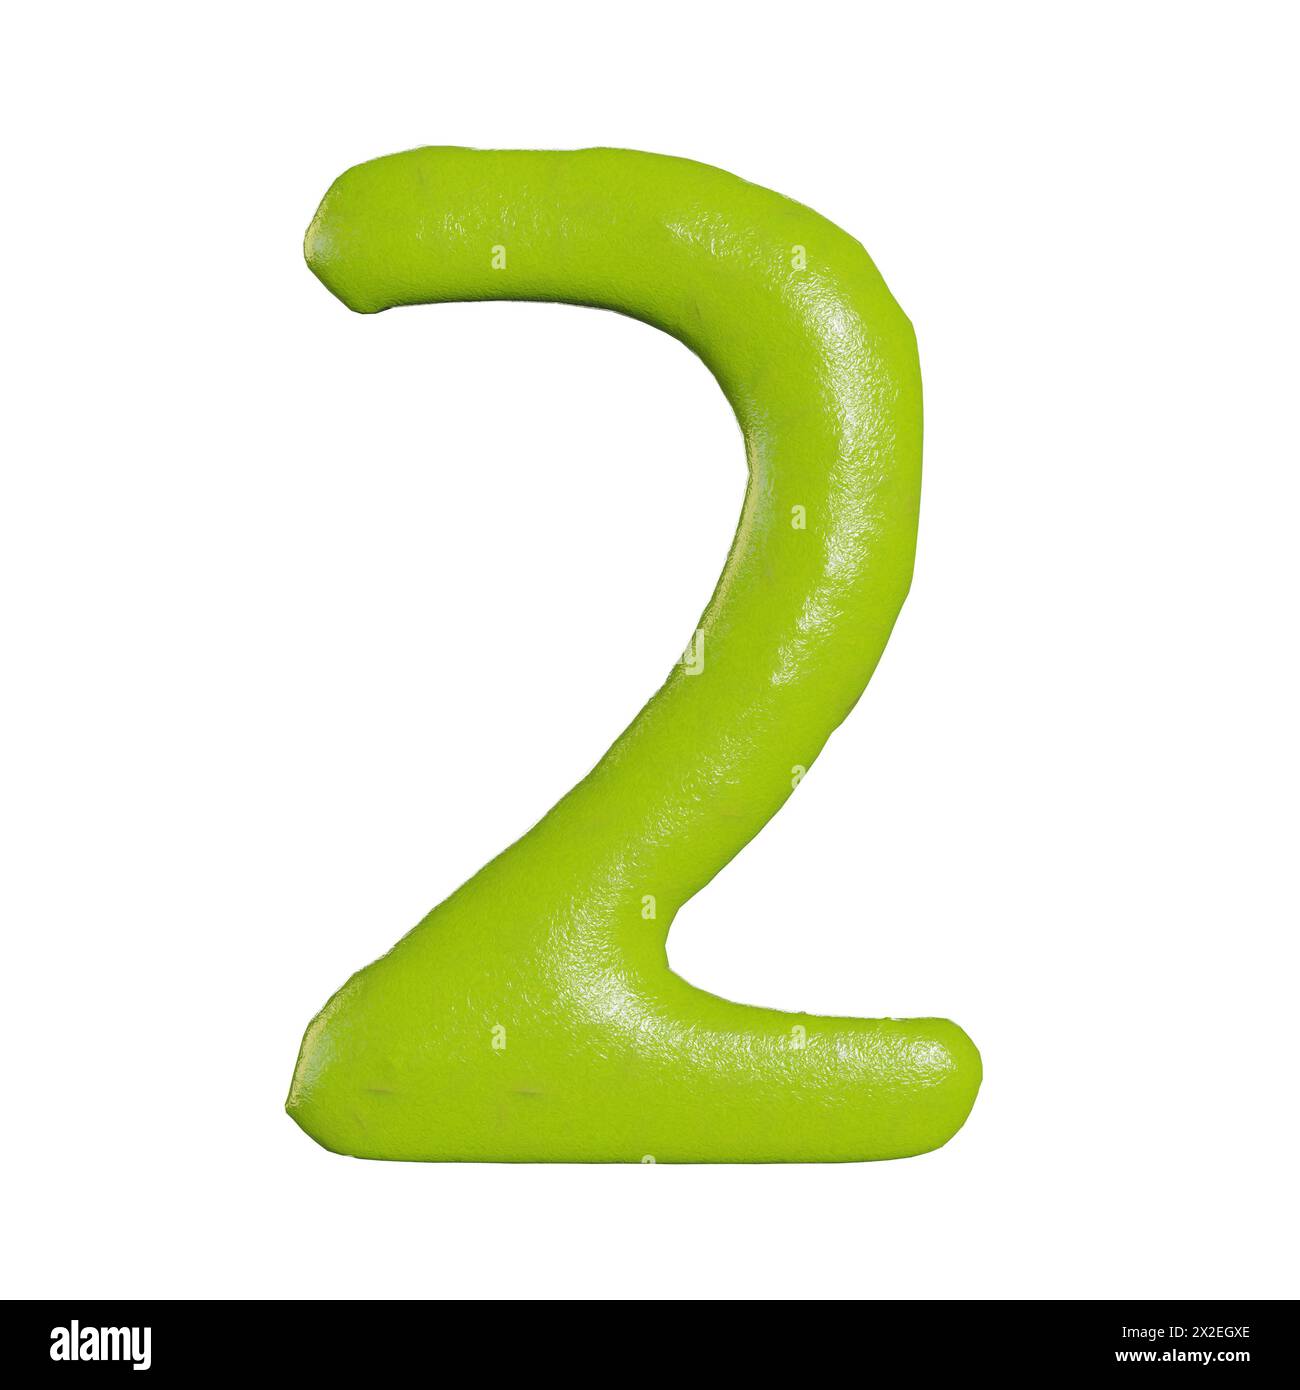 3d render of isolated wasabi numbers on white background Stock Photo